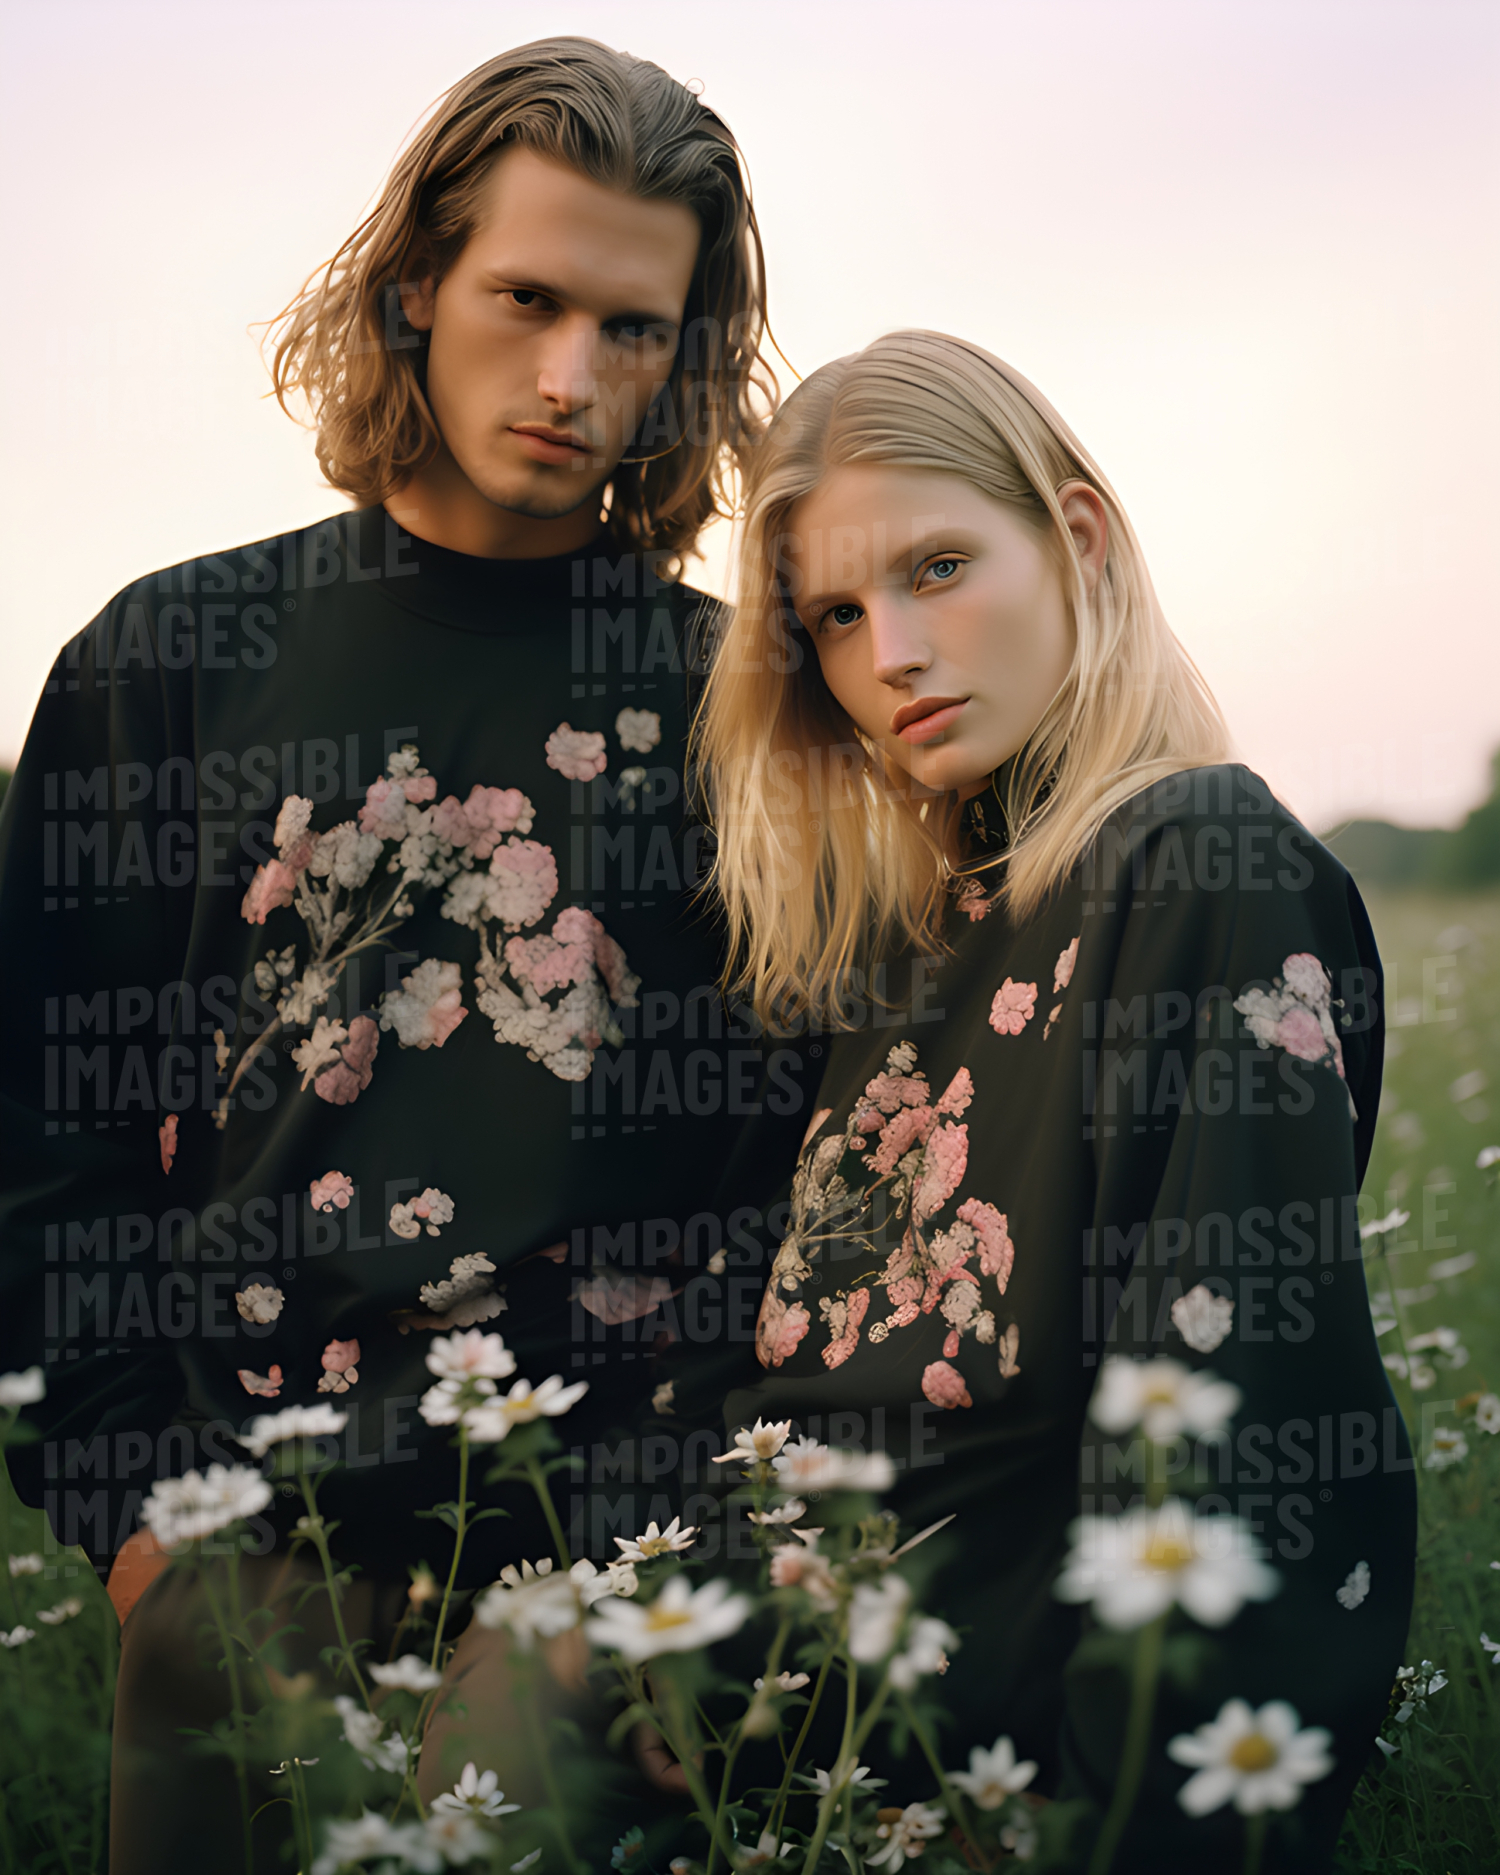 A man with long hair and a blonde woman posing in a meadow